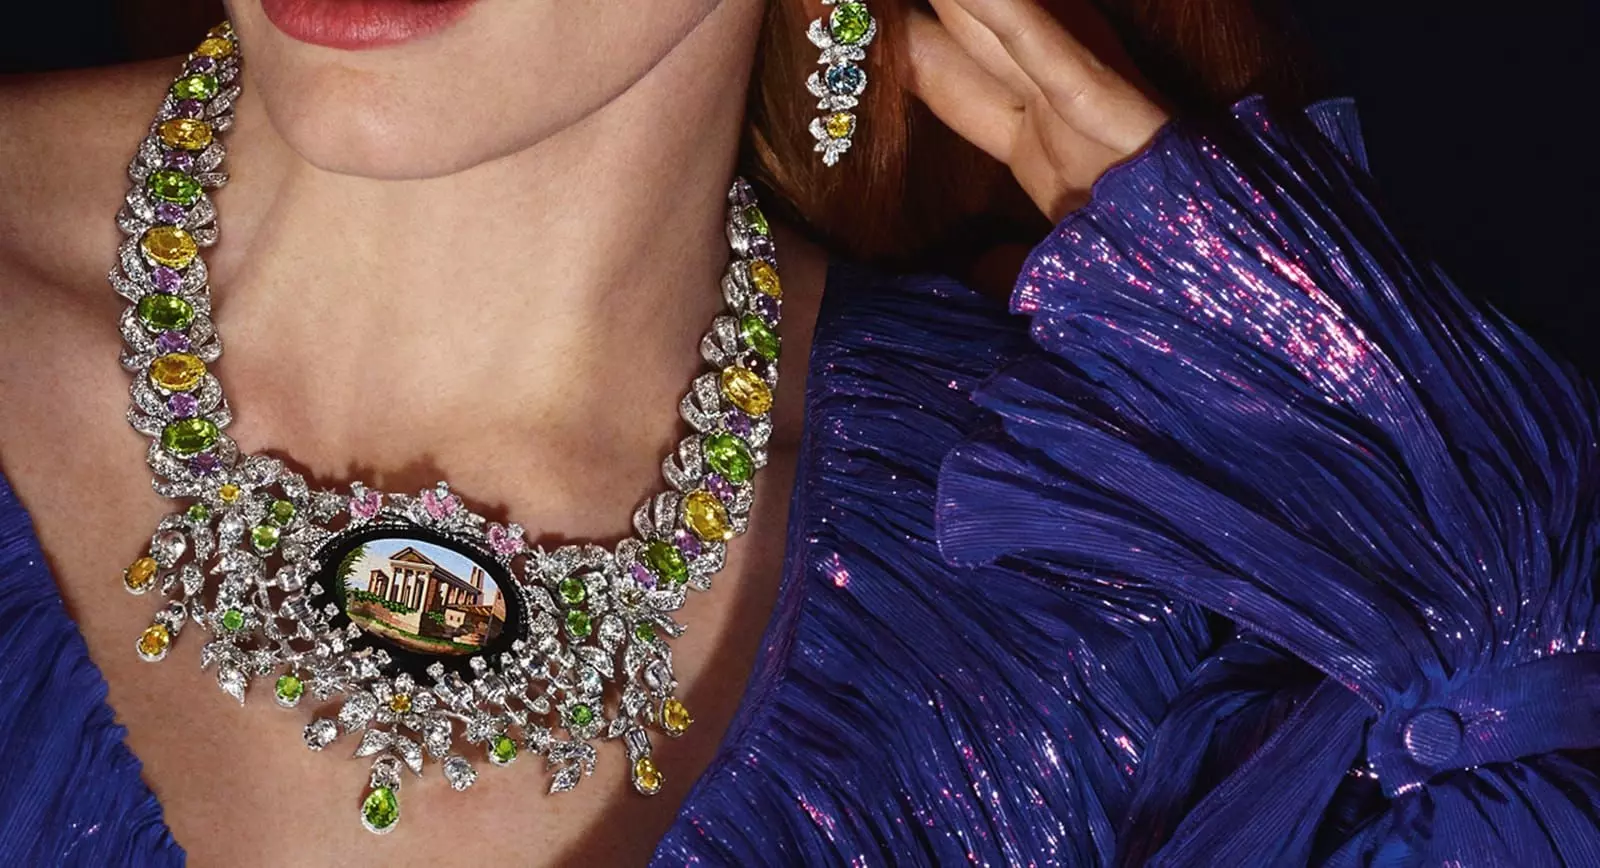 Gucci: Hortus Deliciarum: The New Gucci High Jewelry Collection